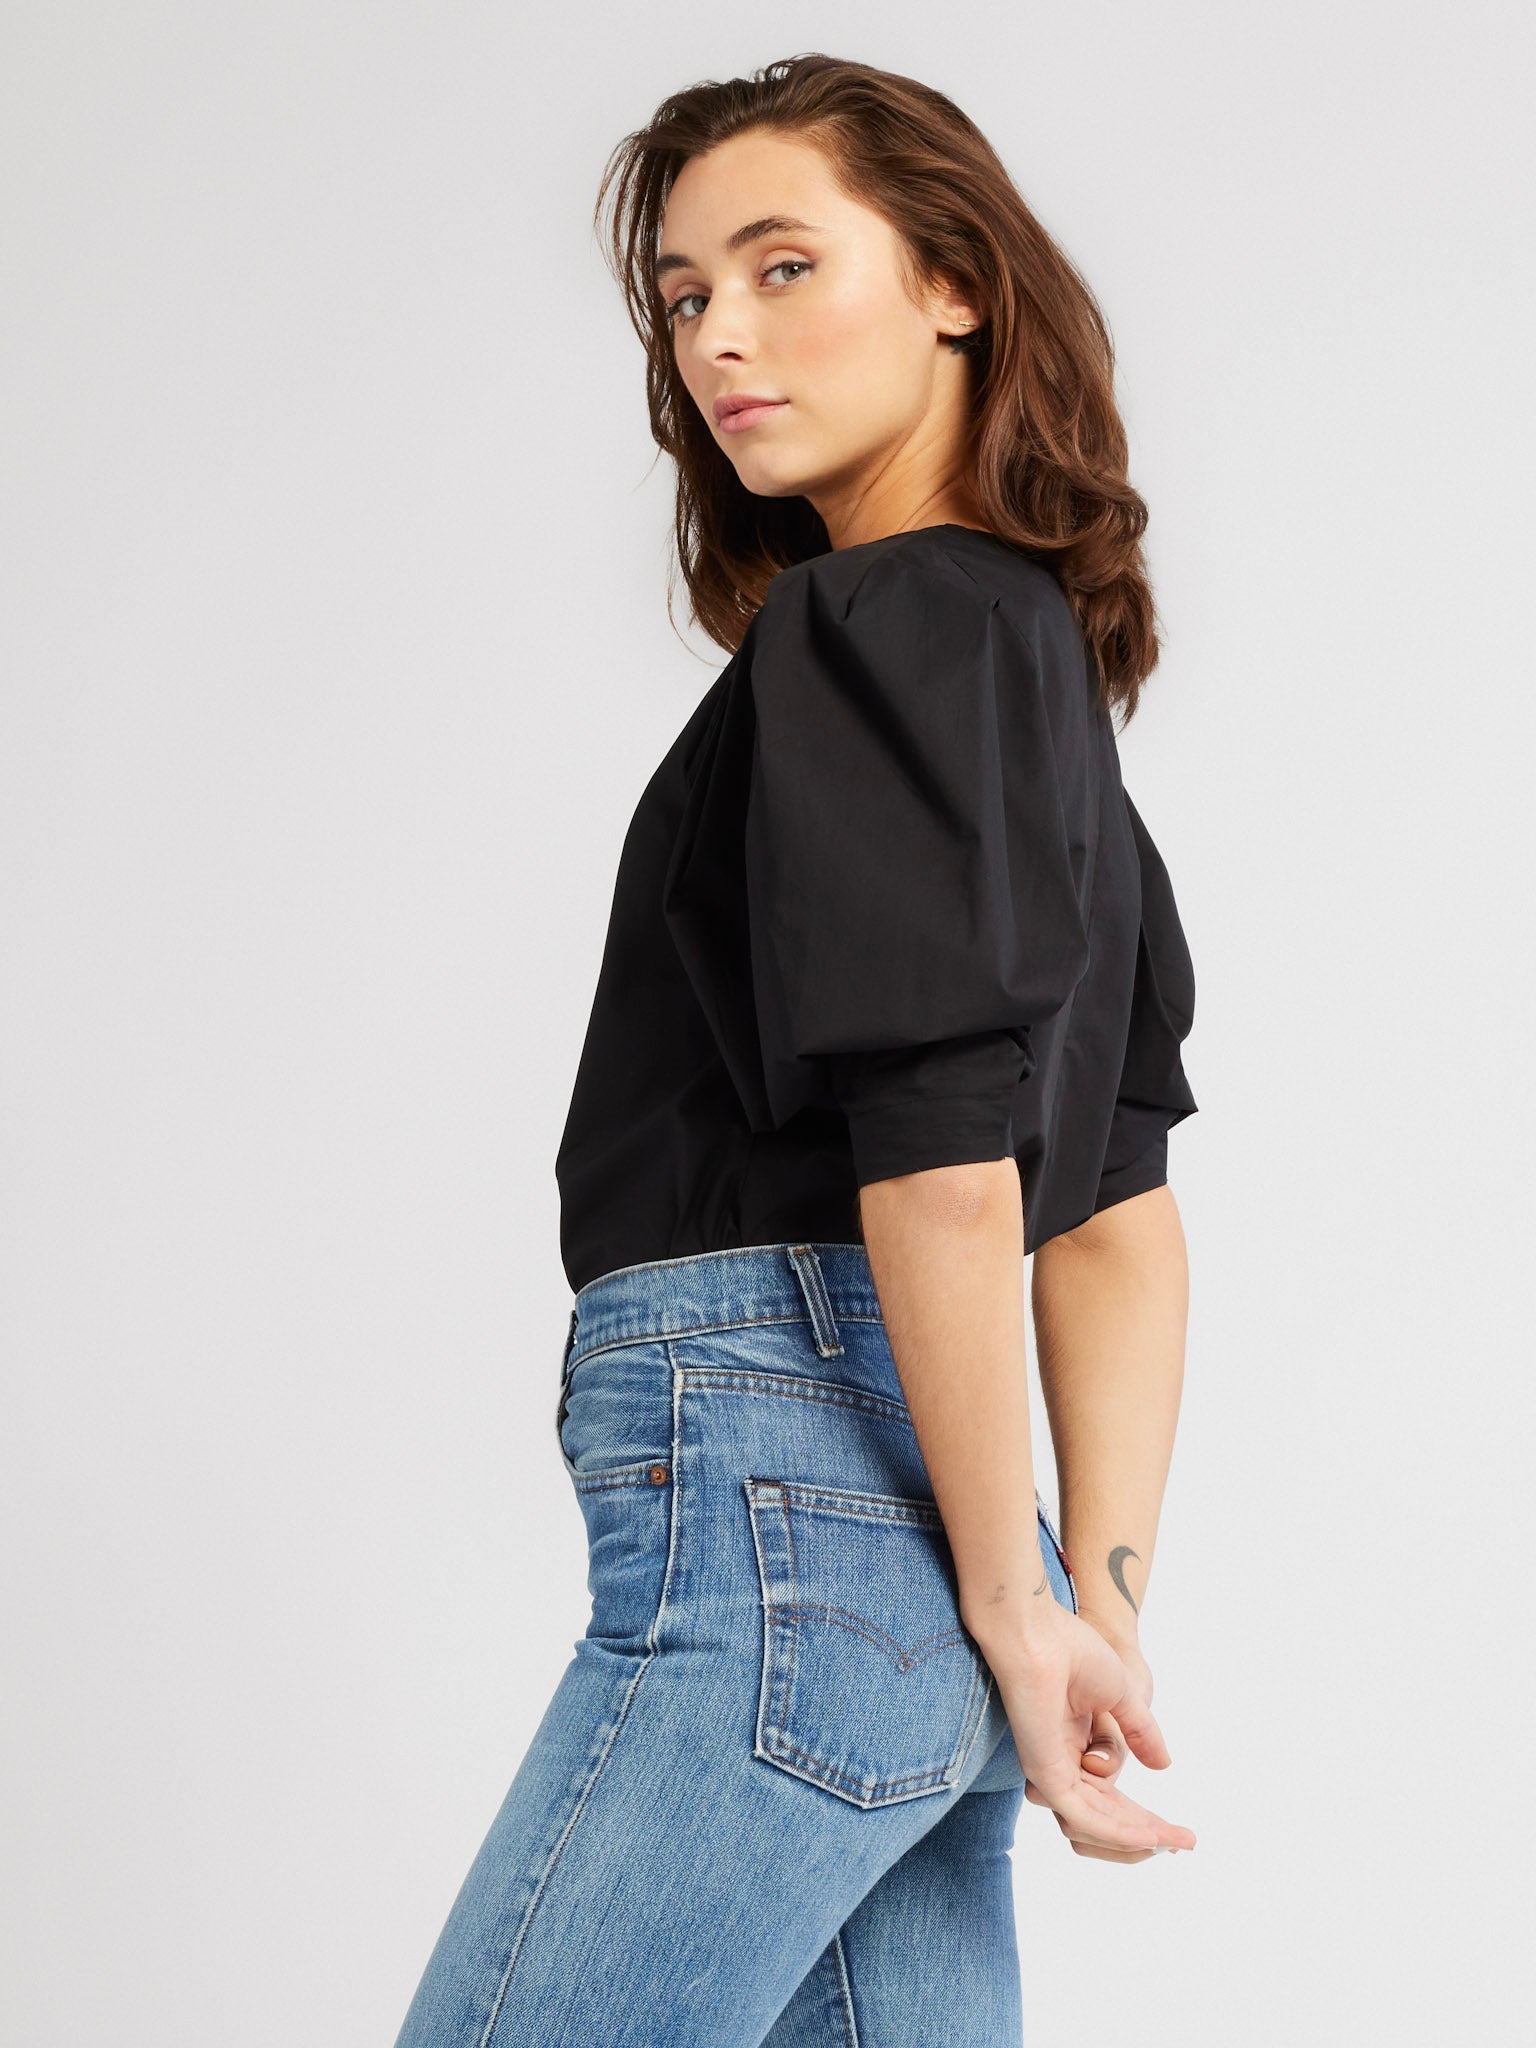 MILLE Clothing Lila Top in Black